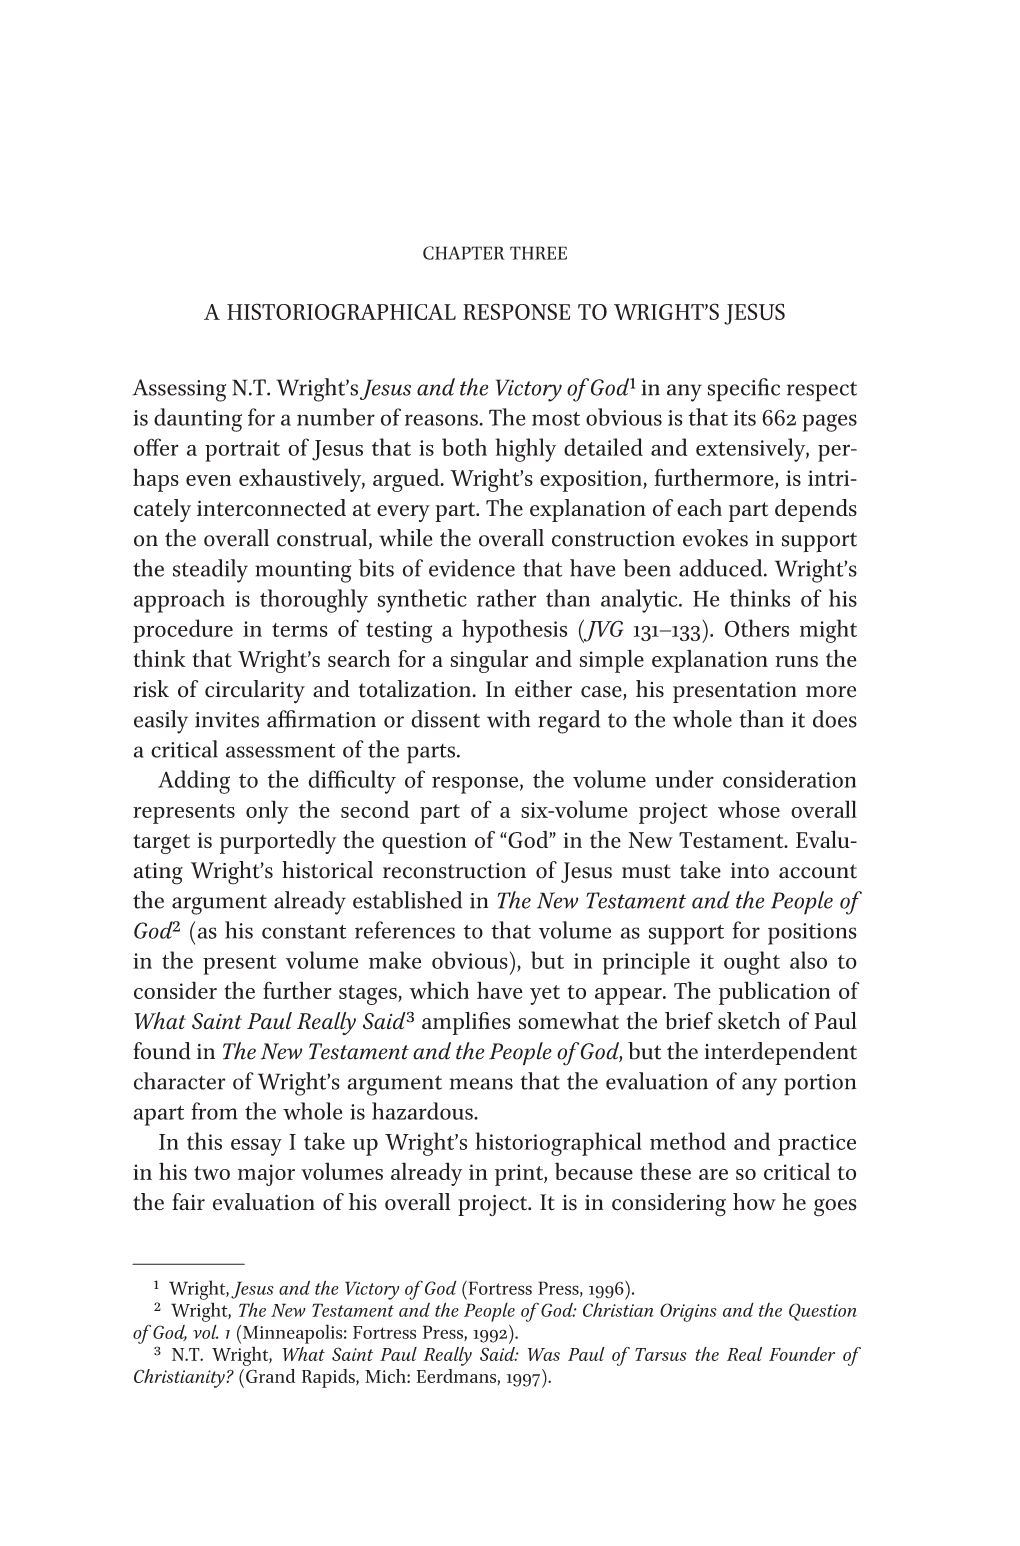 A Historiographical Response to Wright's Jesus Assessing N.T. Wright's Jesus and the Victory of God1 in Any Specific Respect